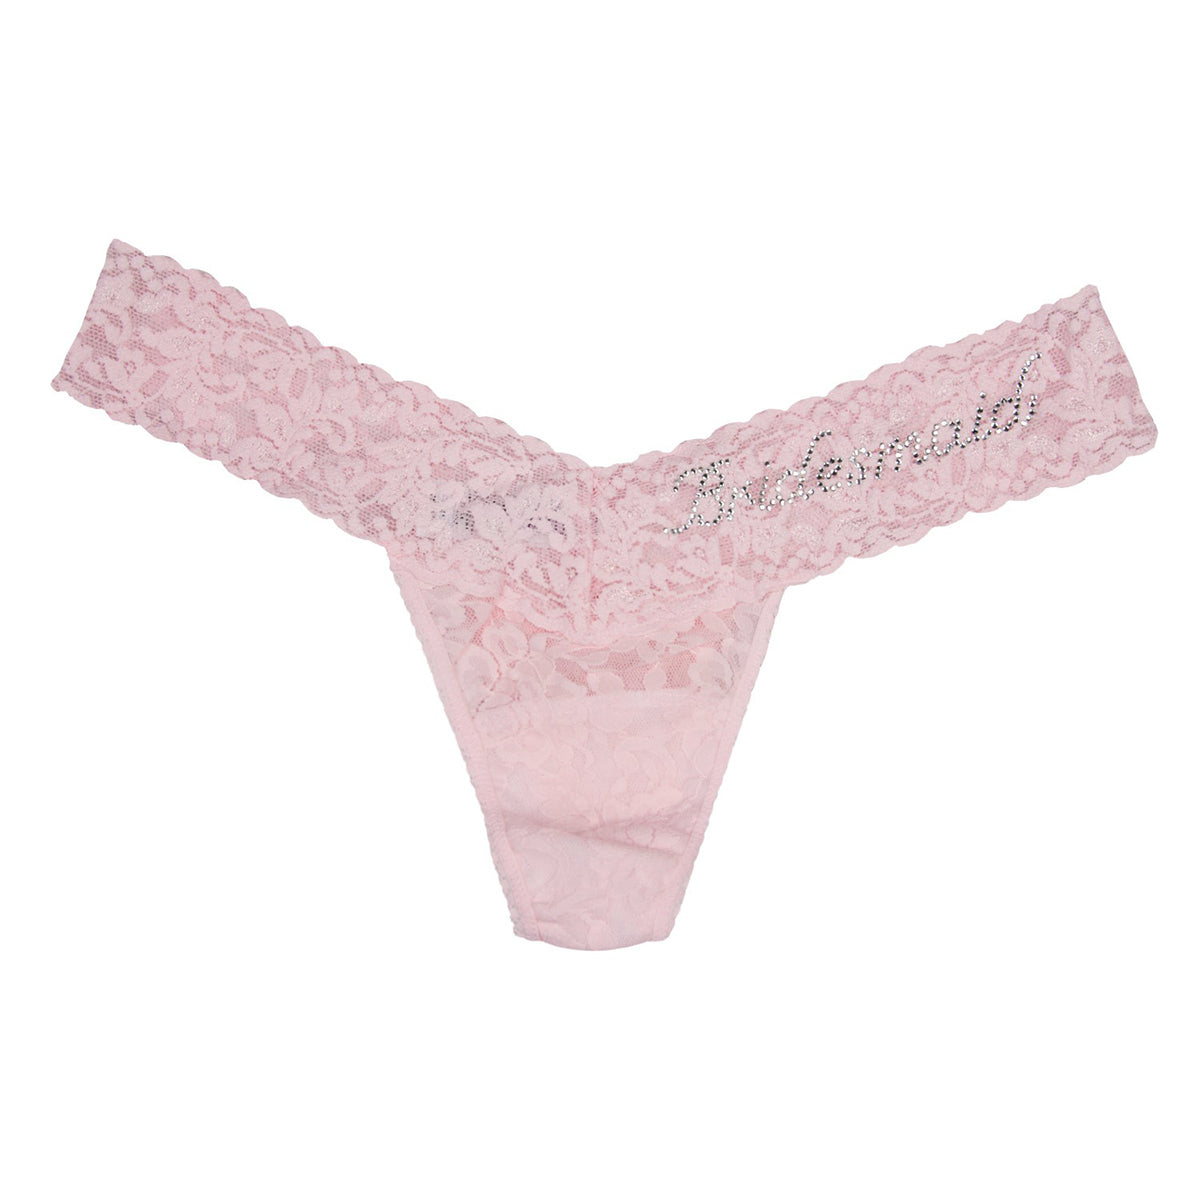 I Do Lace Low Rise Thong